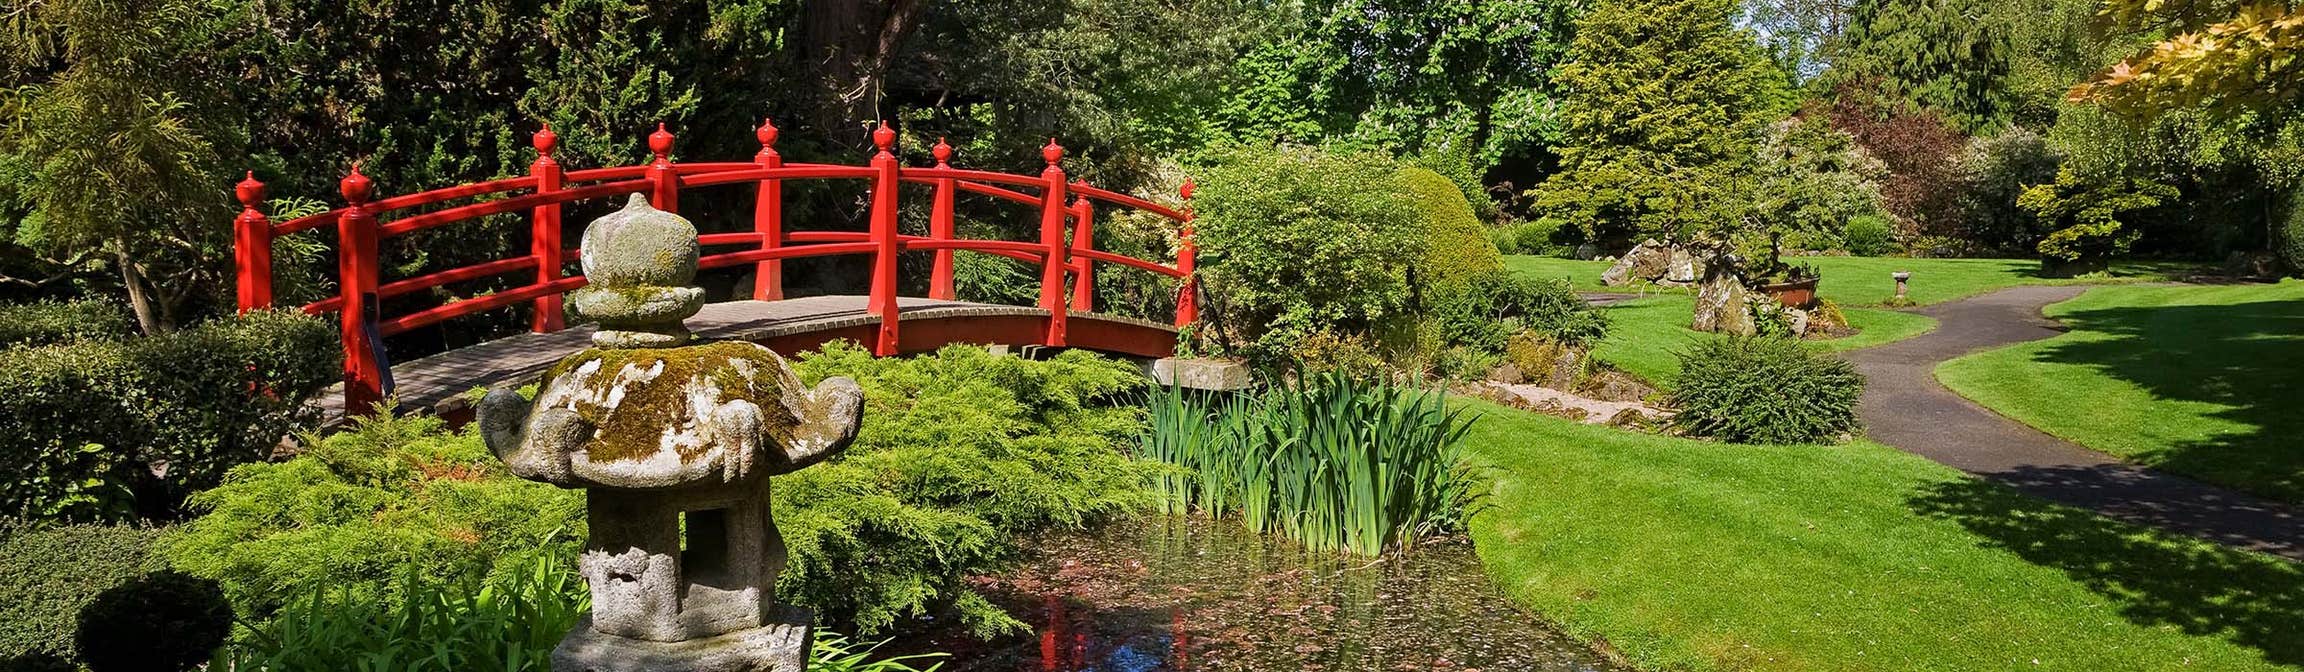 Walking over the red bridge going over a river in the Japanese Gardens is one of the best things to do in Kildare